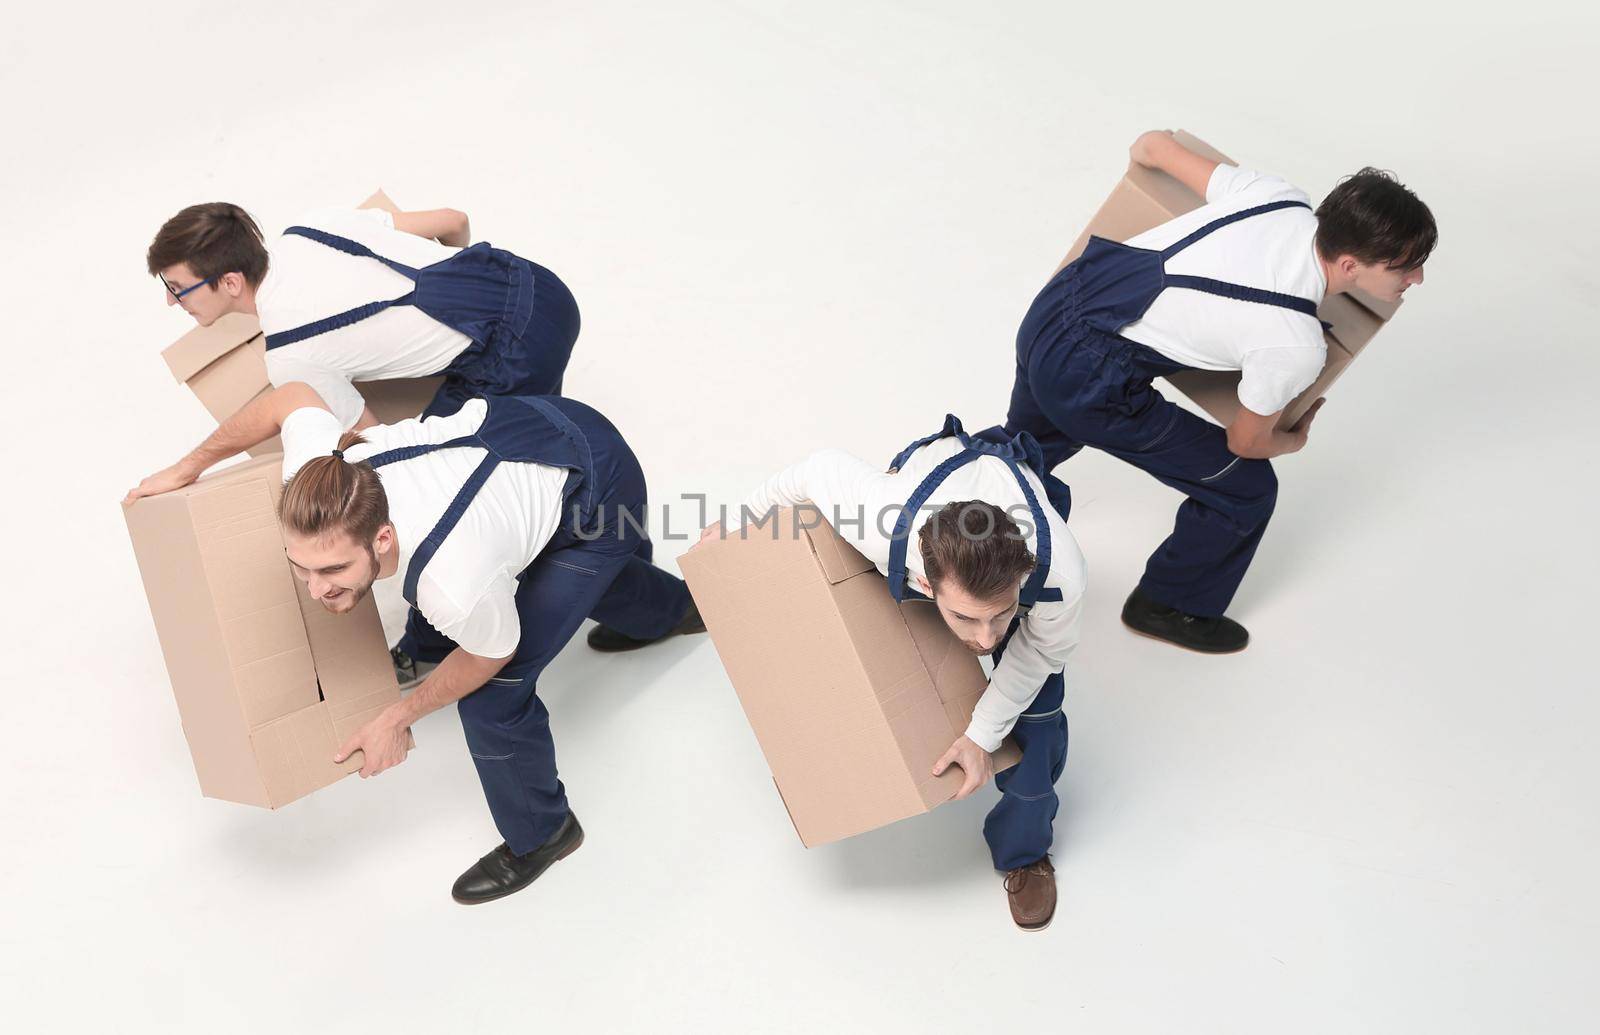 Responsible movers in a hurry to do their job. by asdf